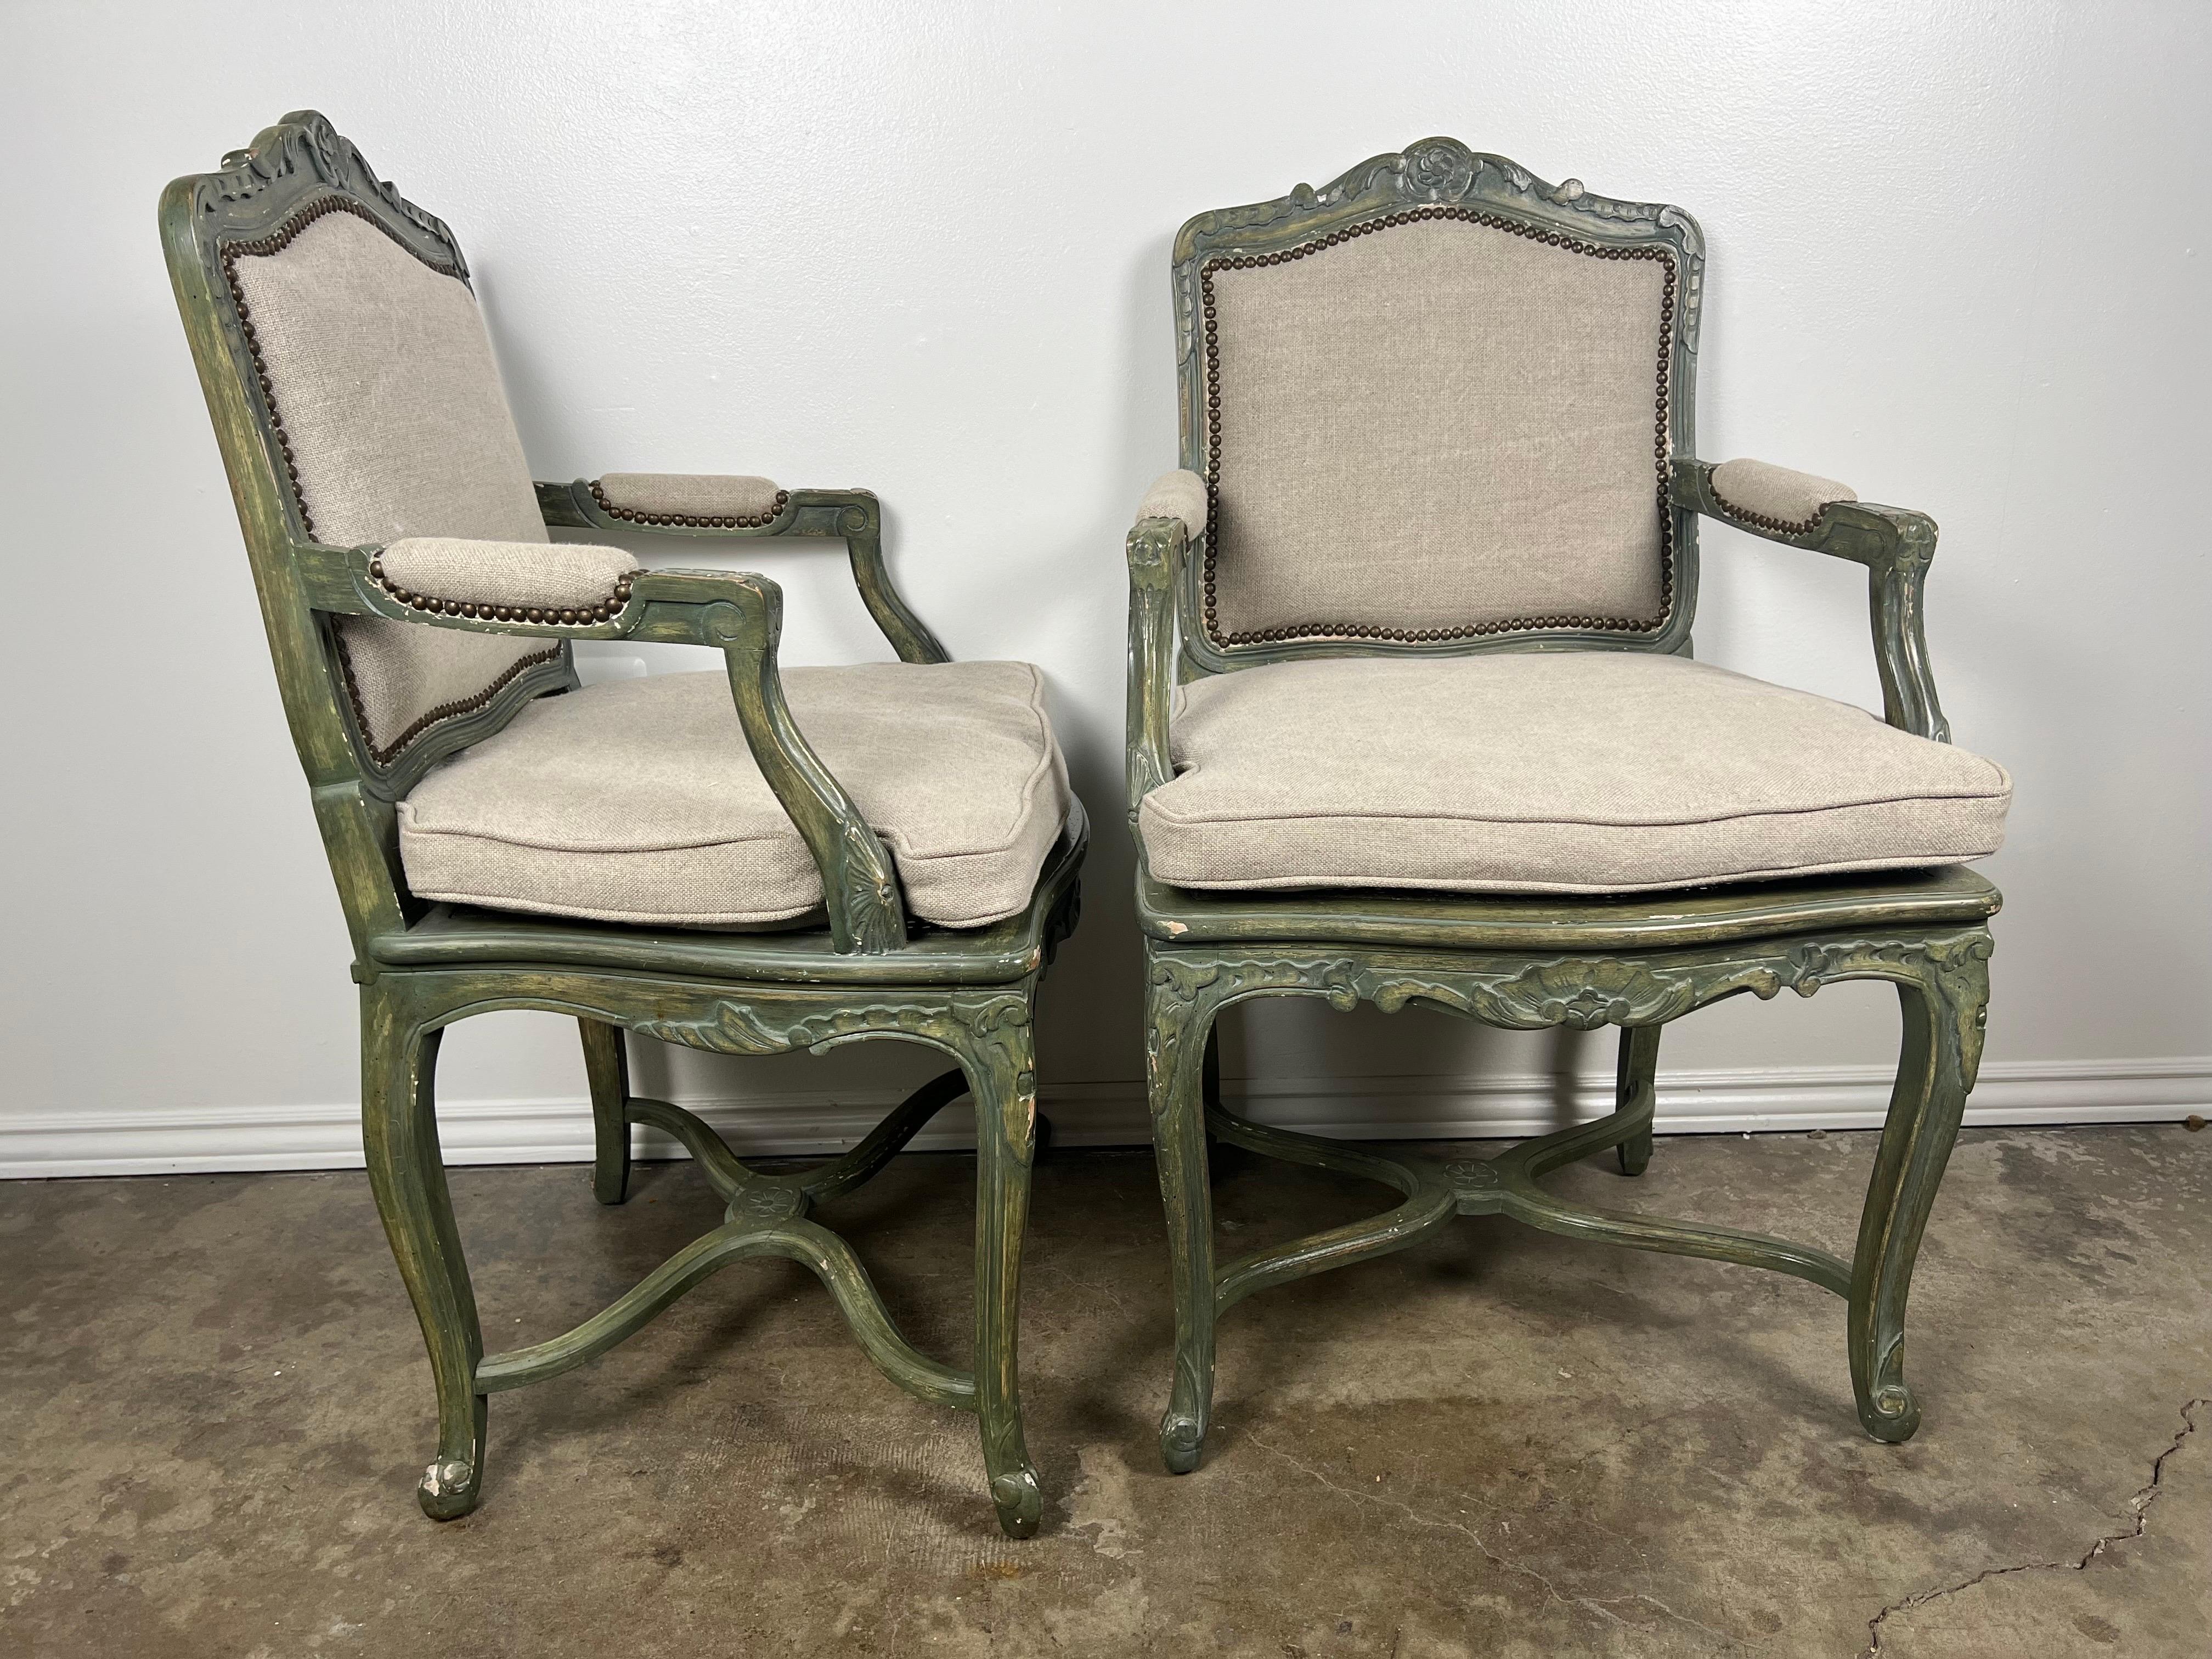 Pair of French Painted Cane Seat Armchairs with Cushions For Sale 1